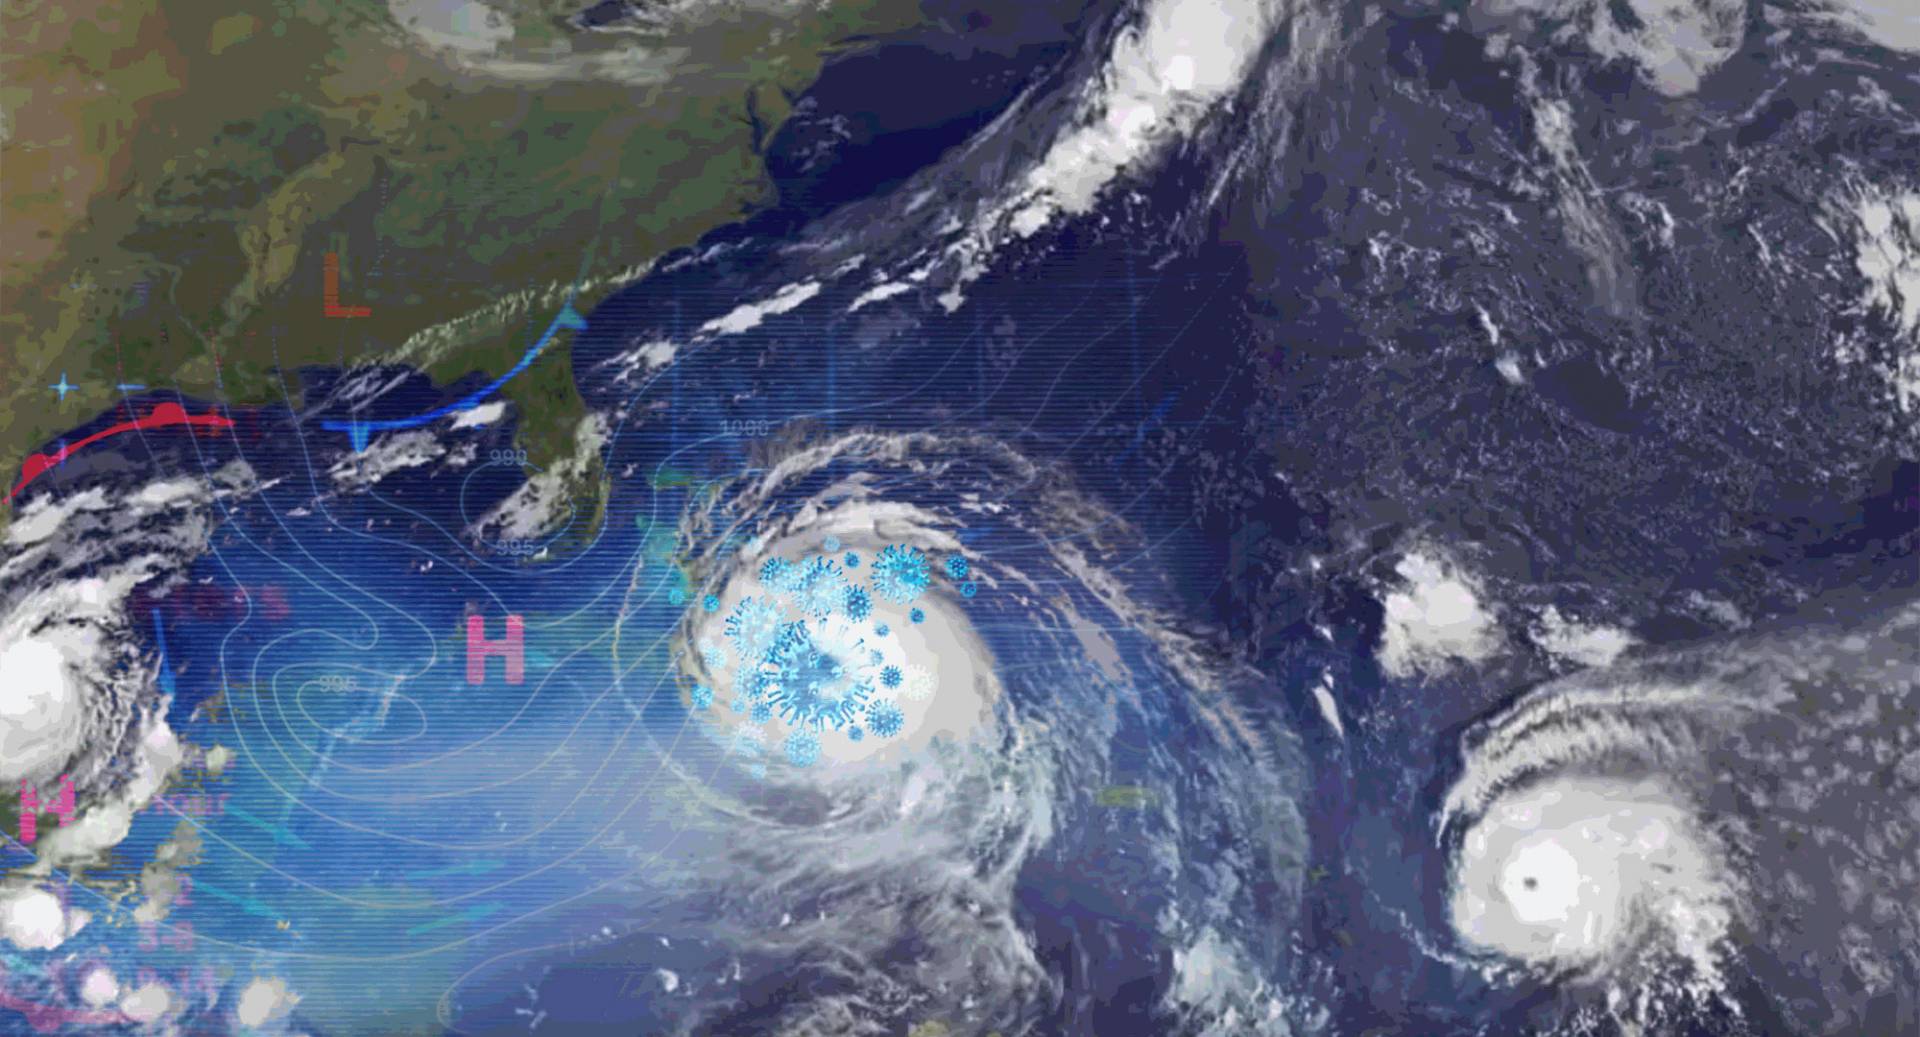 Illustration of weather satellite imagery of a hurricane with COVID virus forms